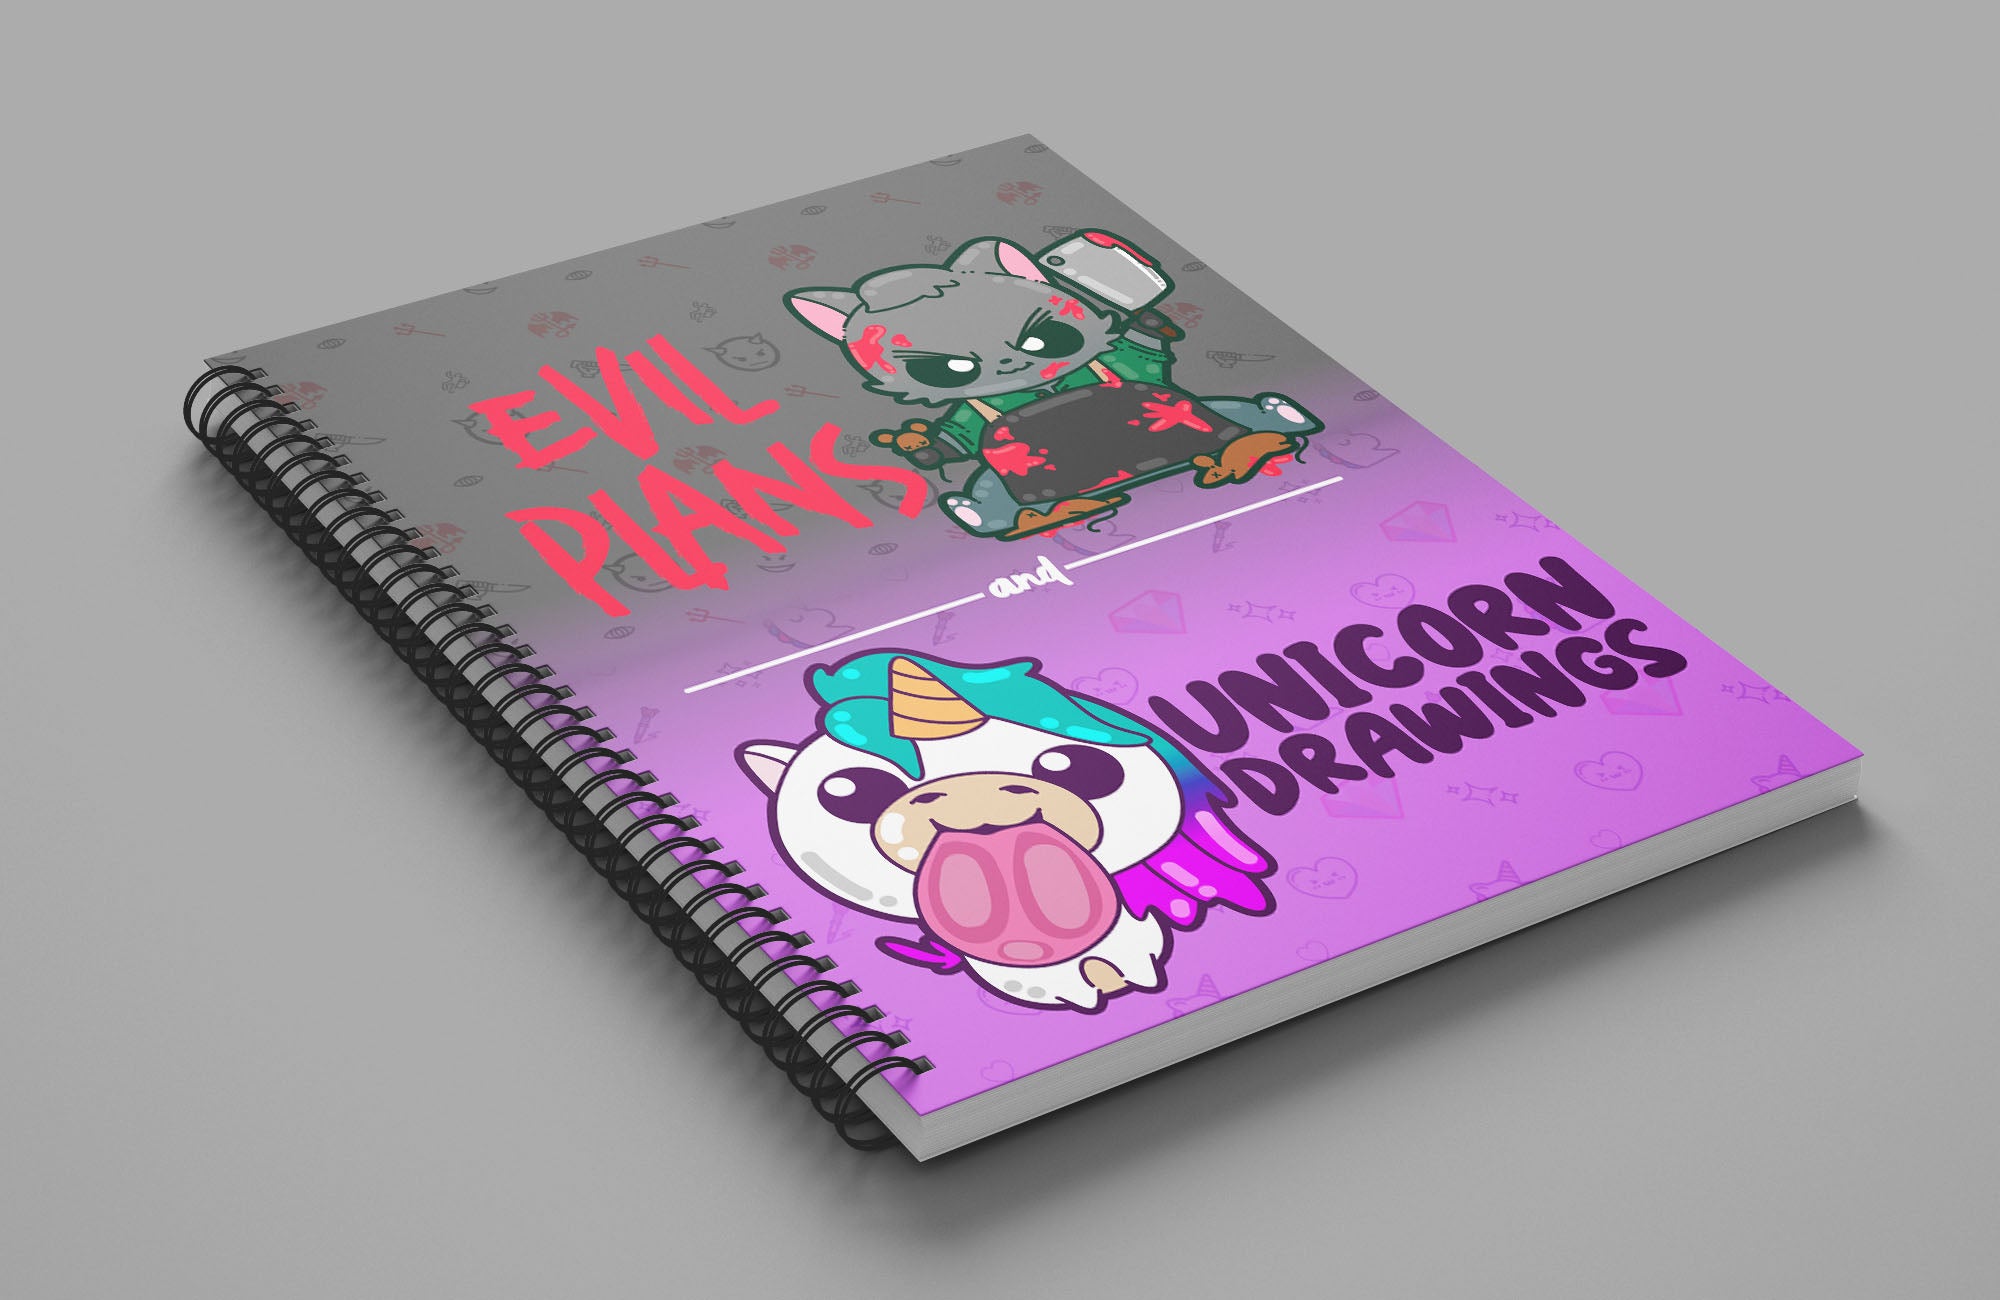 Undertale Au Sanses Good And Evil Notebook: (110 Pages, Lined, 6 x